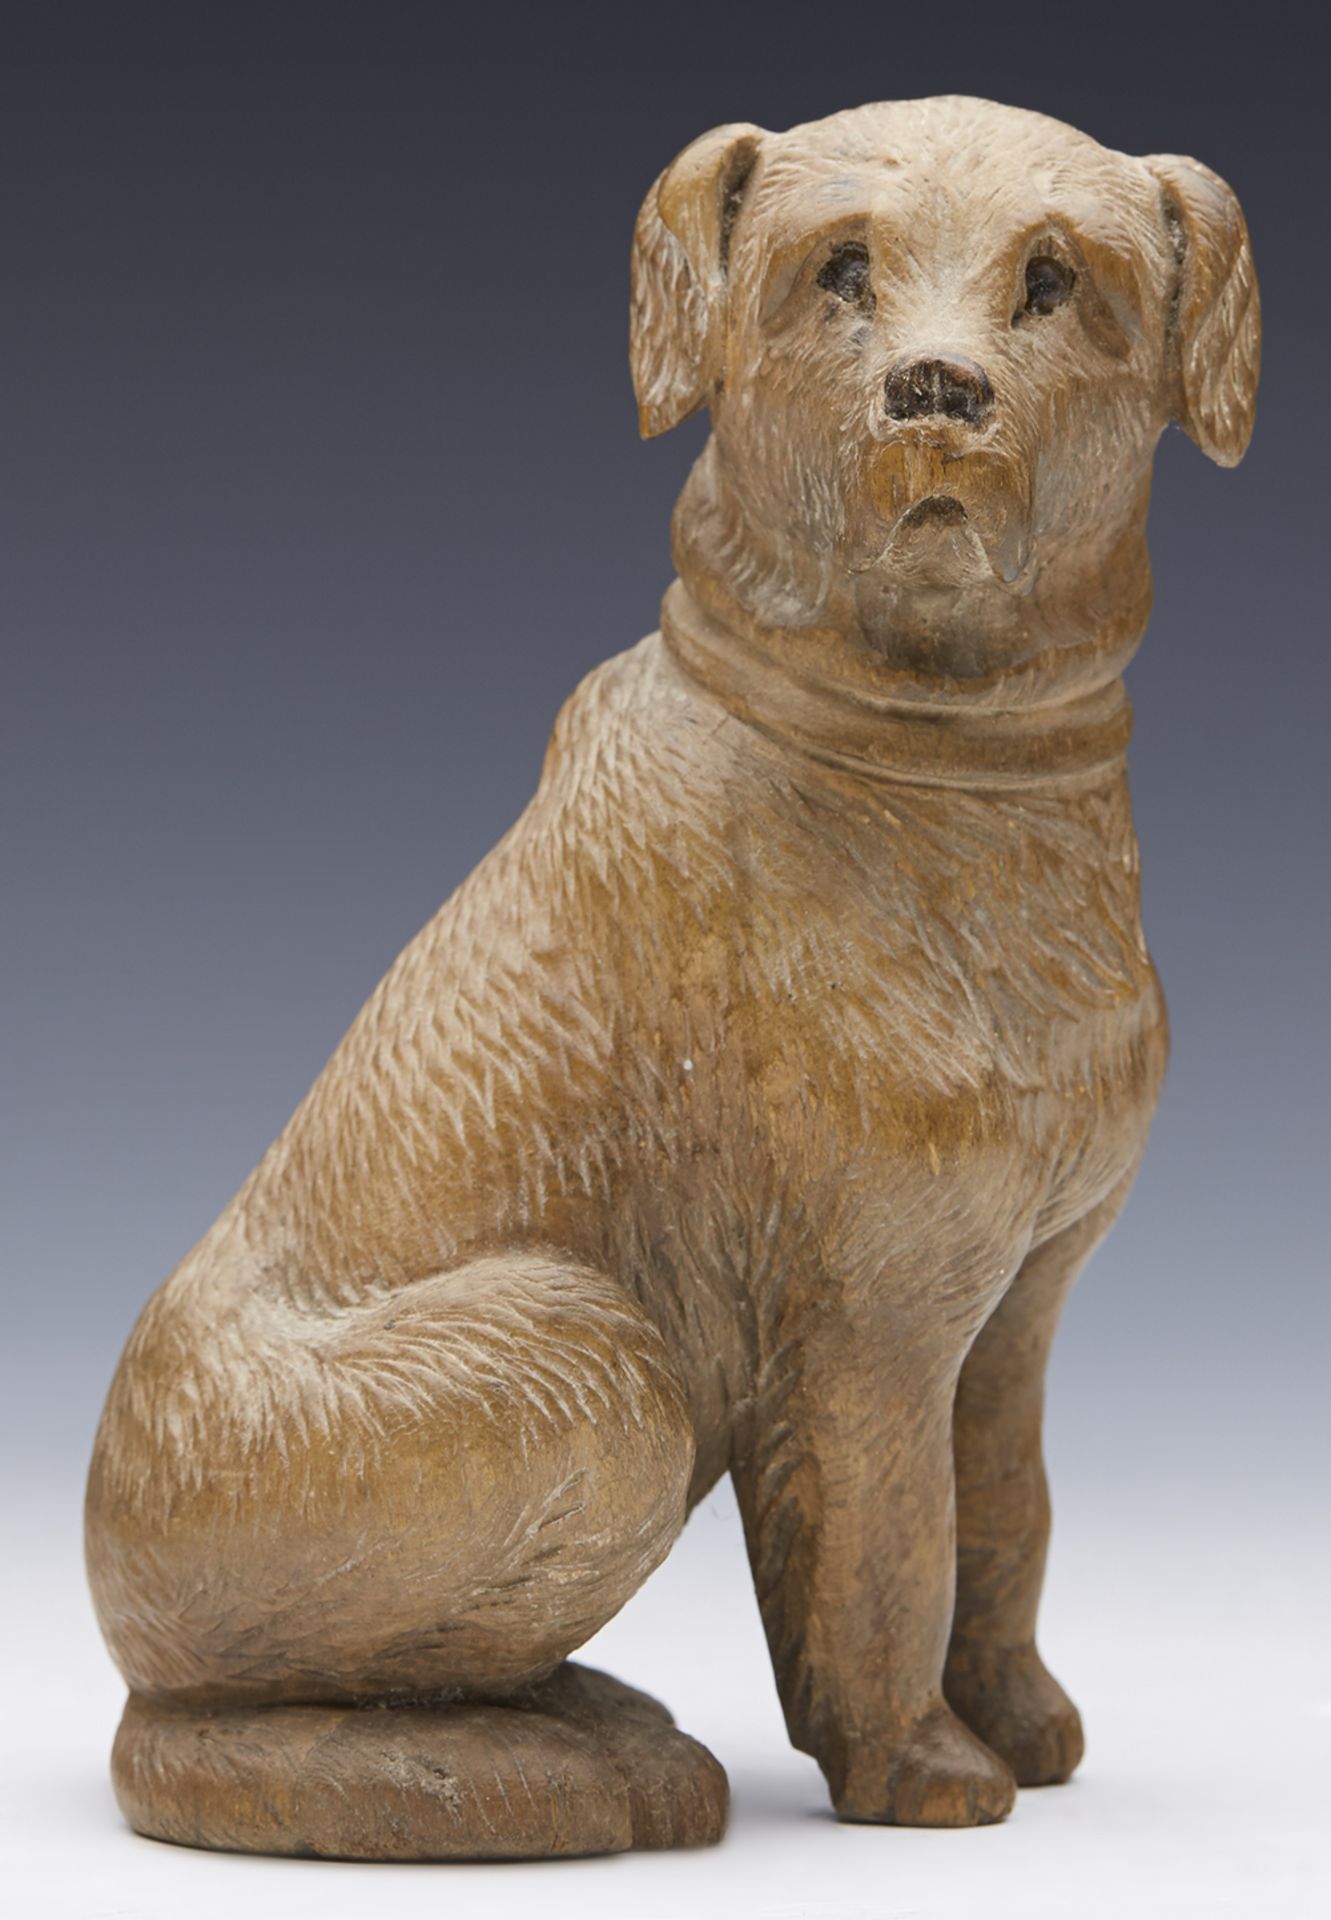 Antique Carved Blackforest Figure Of A Seated Dog 19Th C.